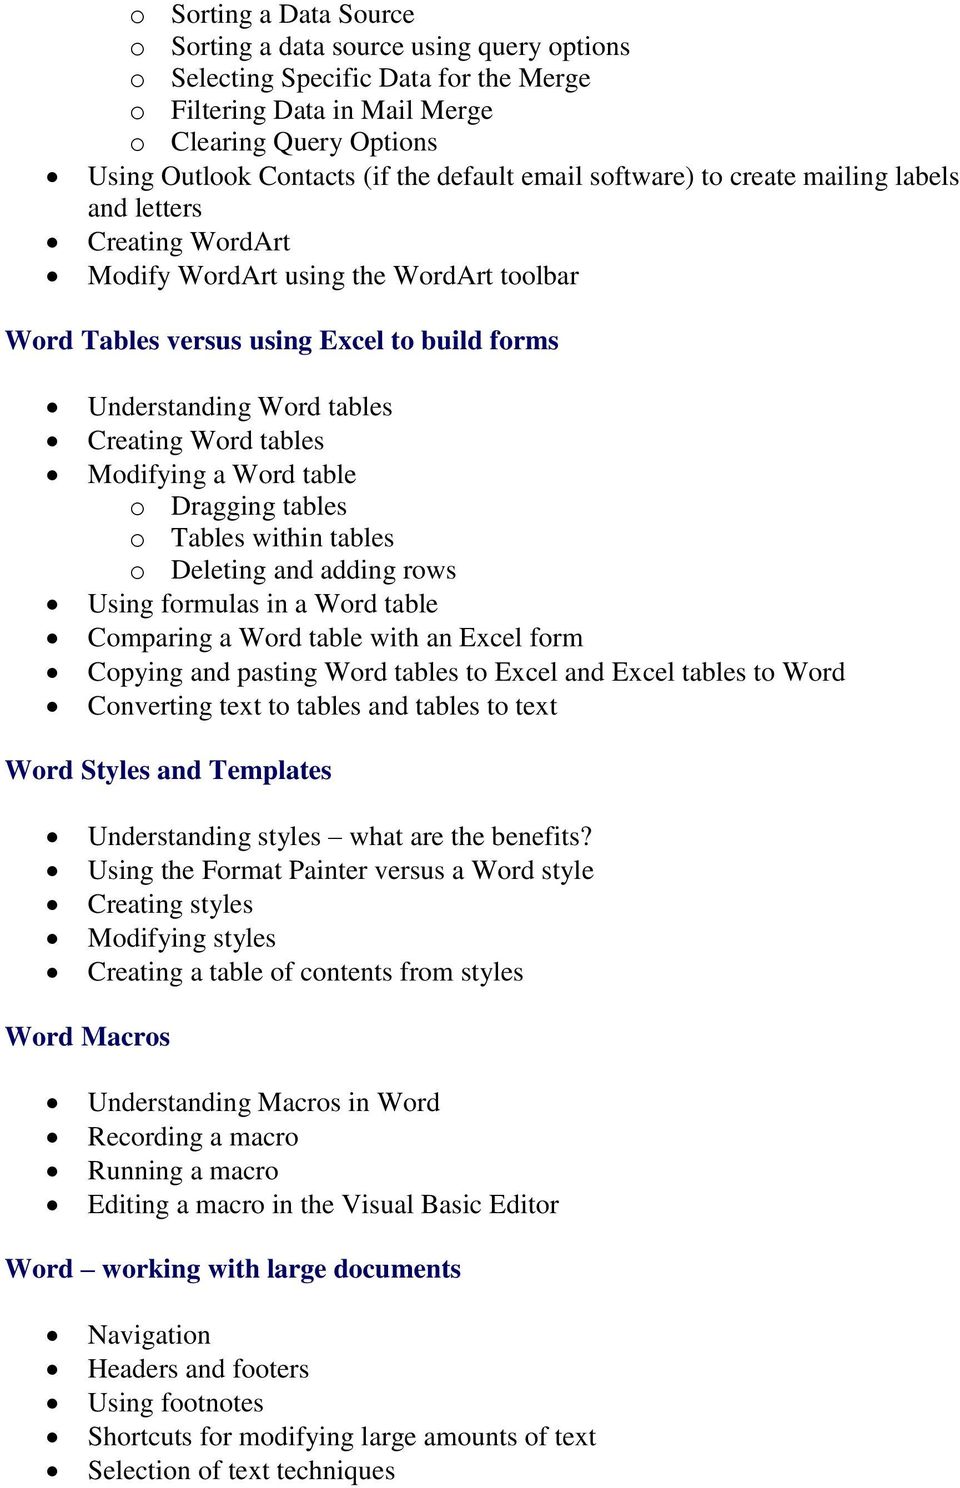 Word tables Modifying a Word table o Dragging tables o Tables within tables o Deleting and adding rows Using formulas in a Word table Comparing a Word table with an Excel form Copying and pasting